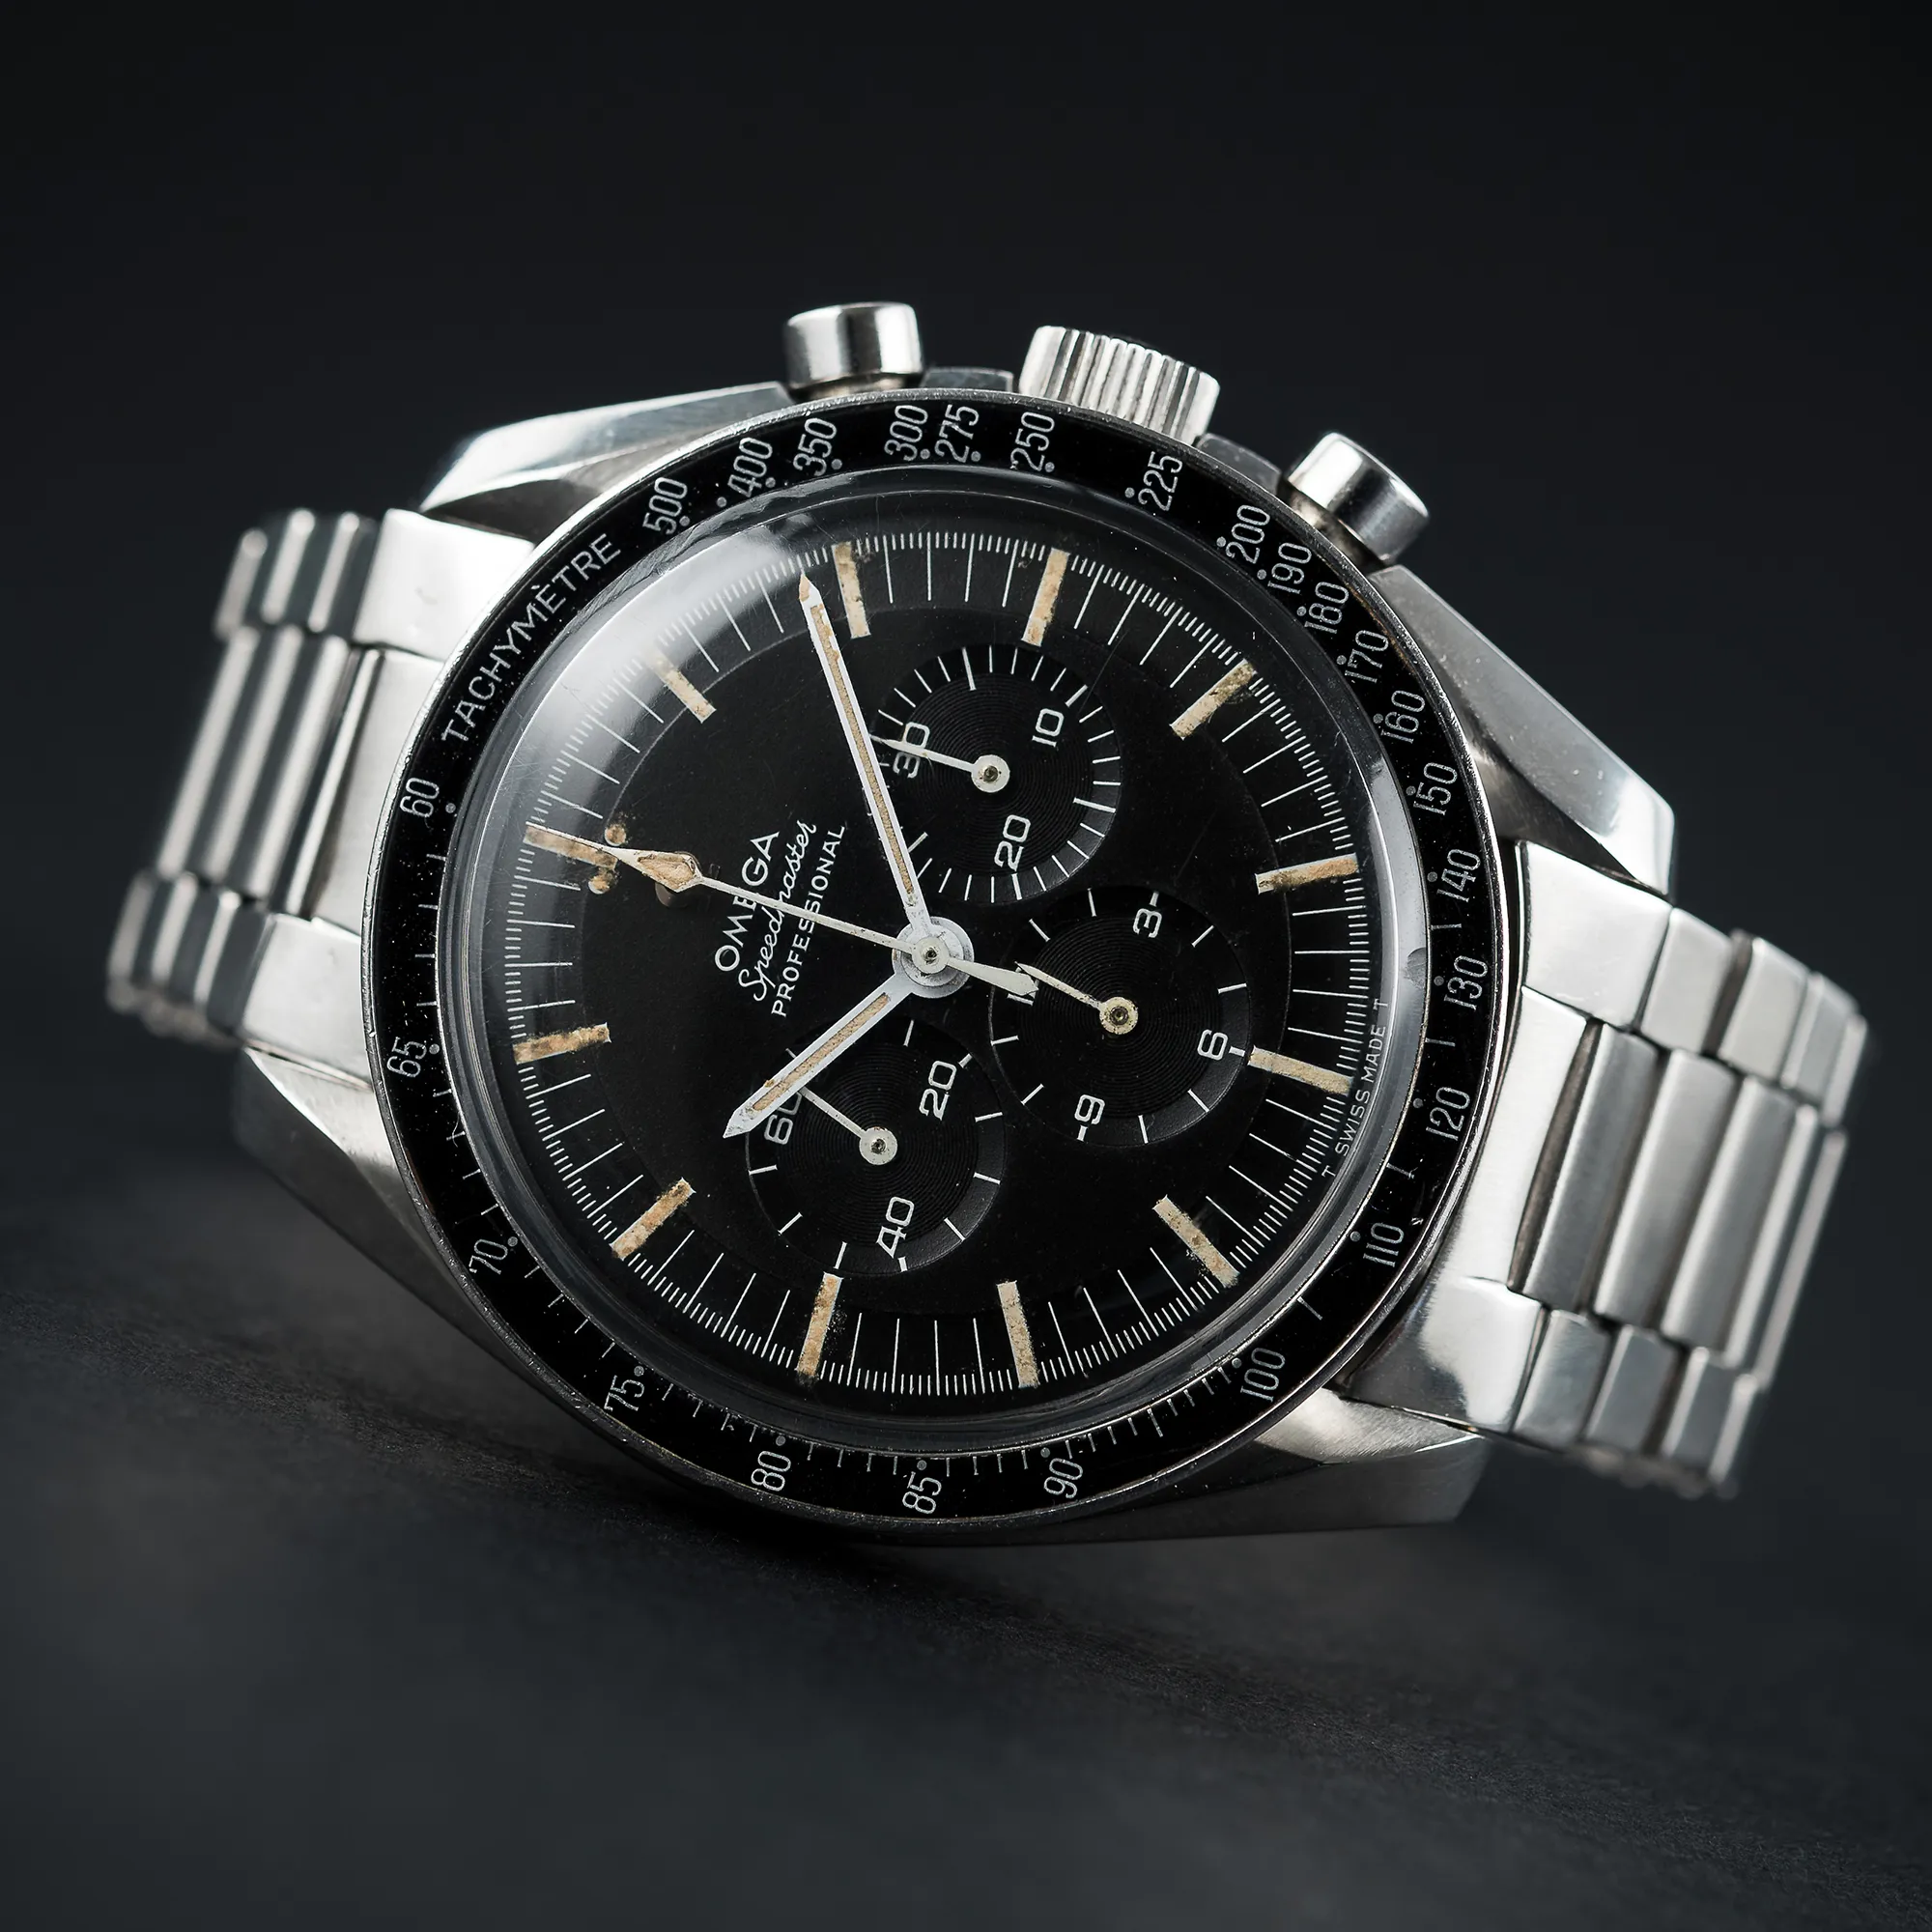 Omega Speedmaster Professional Moonwatch Moonphase 105.012-66 CB 42mm Stainless steel Black